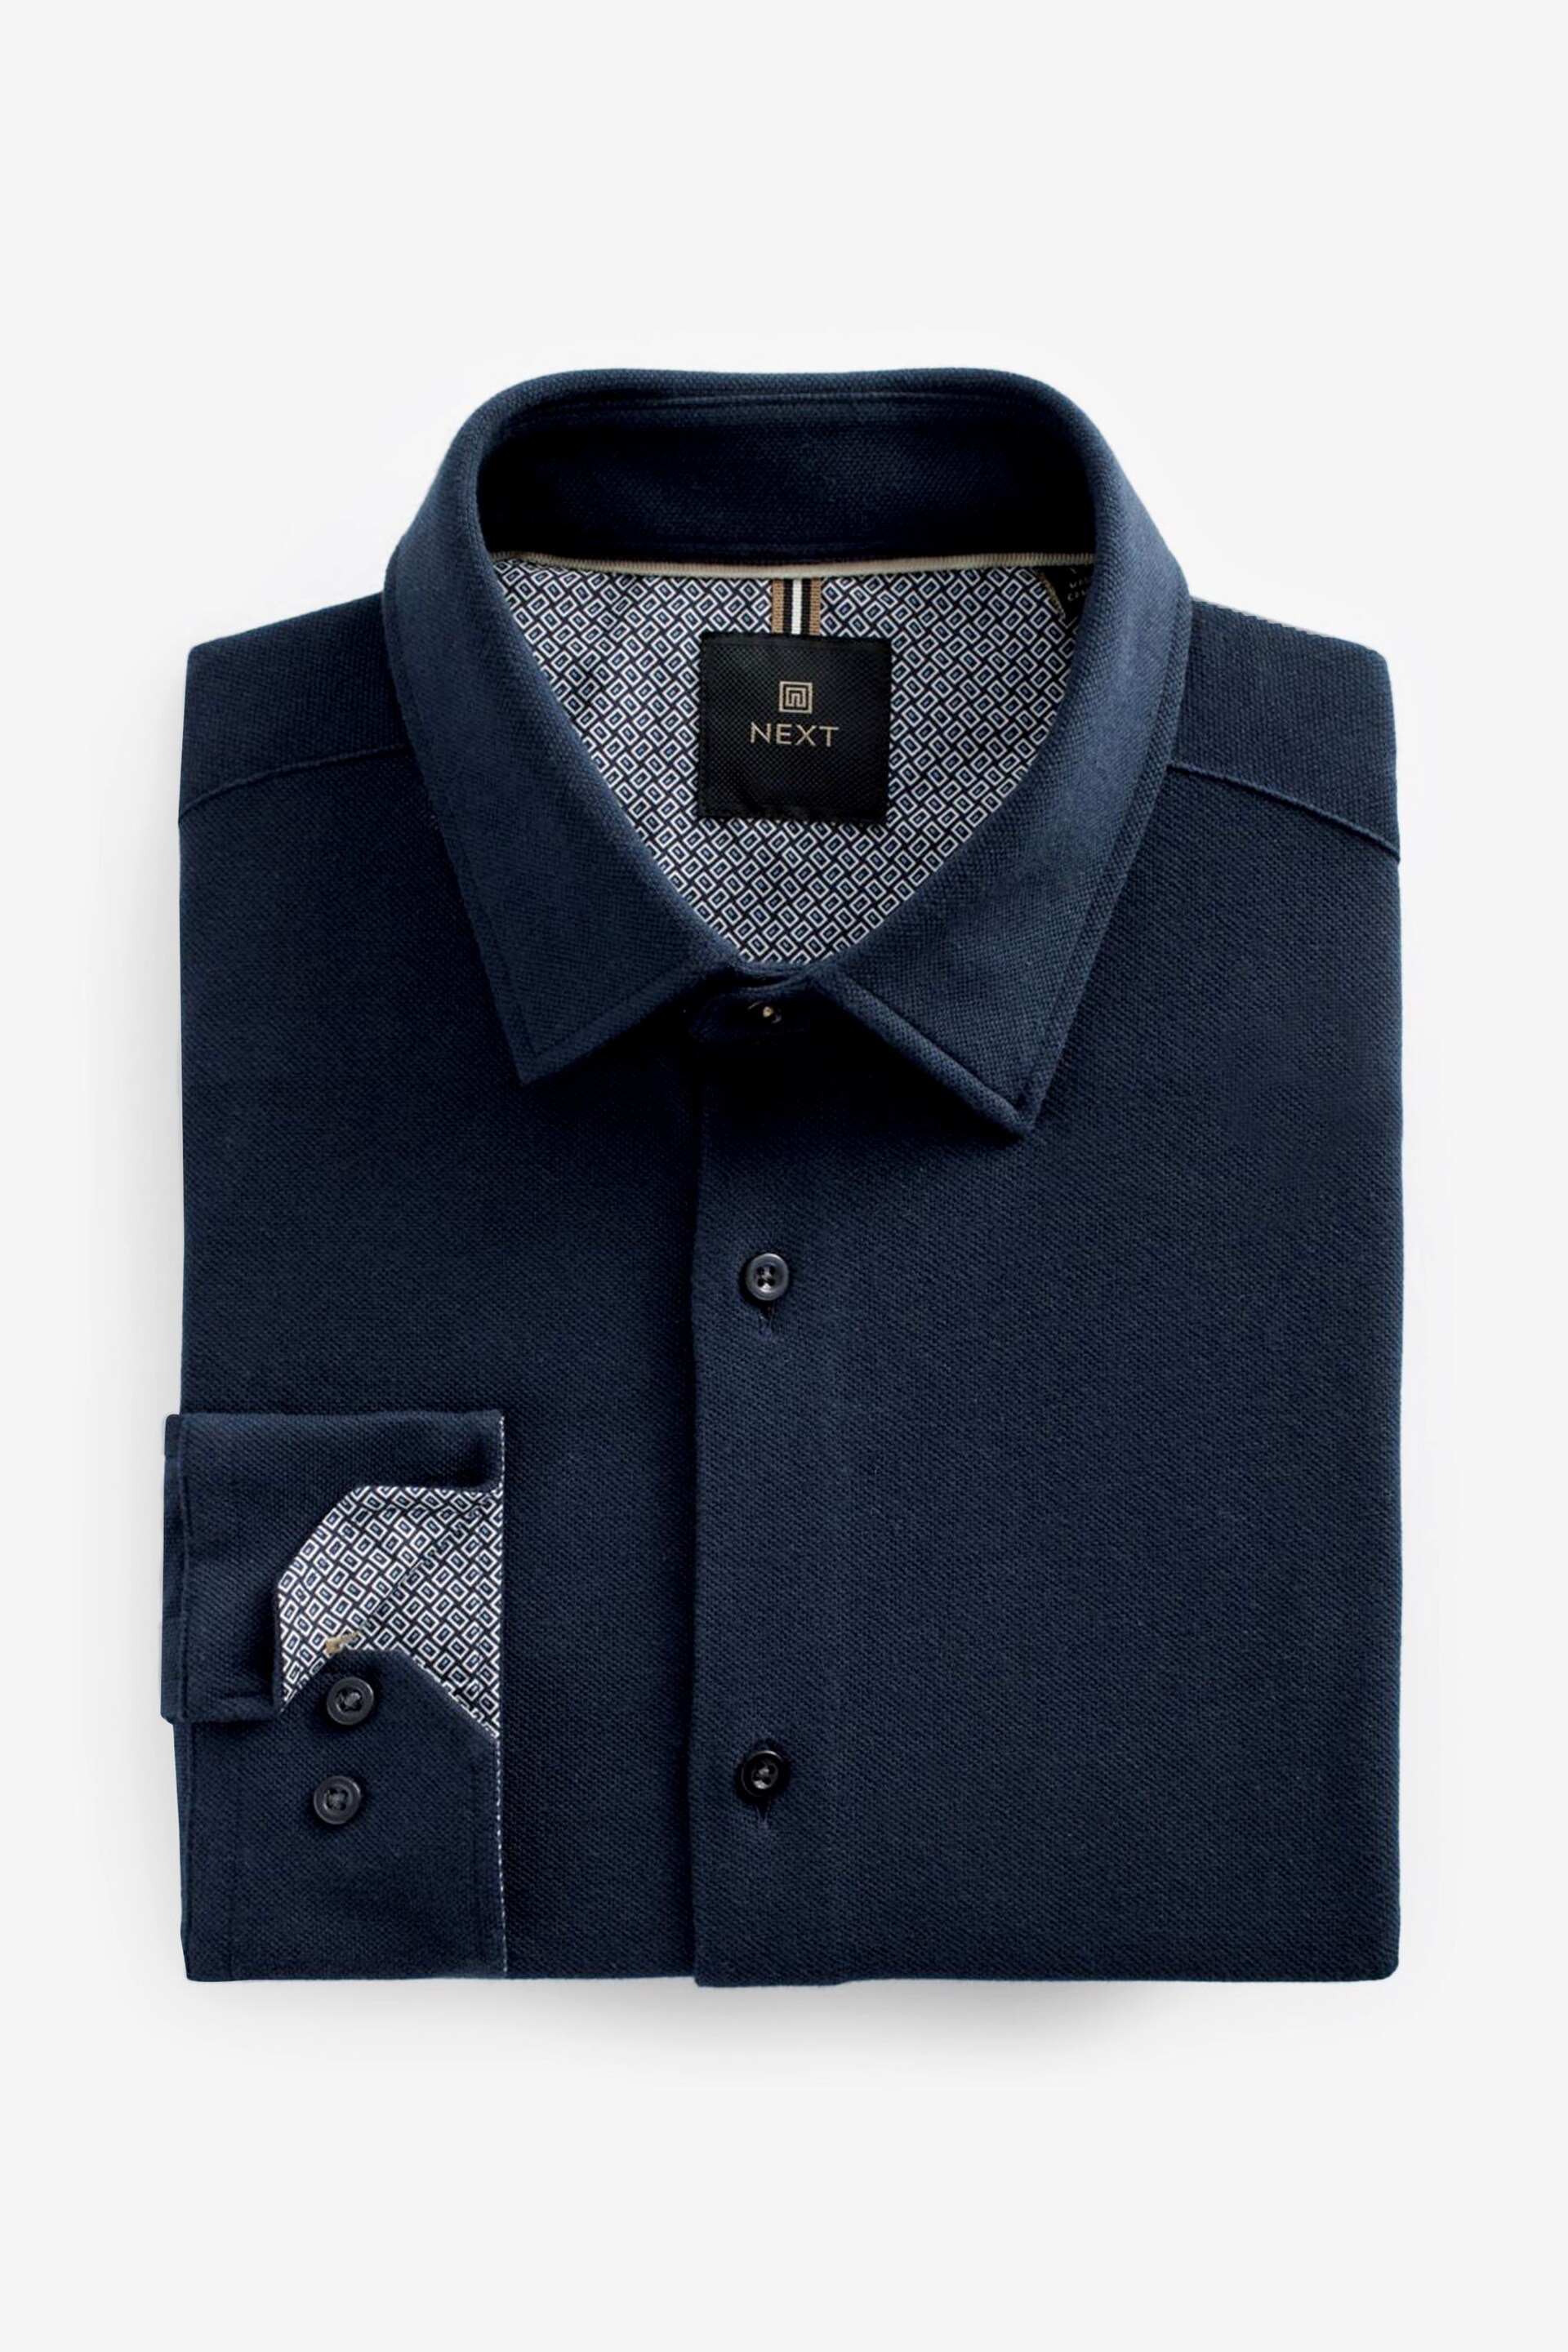 Navy Blue Motionflex Knitted Shirt - Image 7 of 9